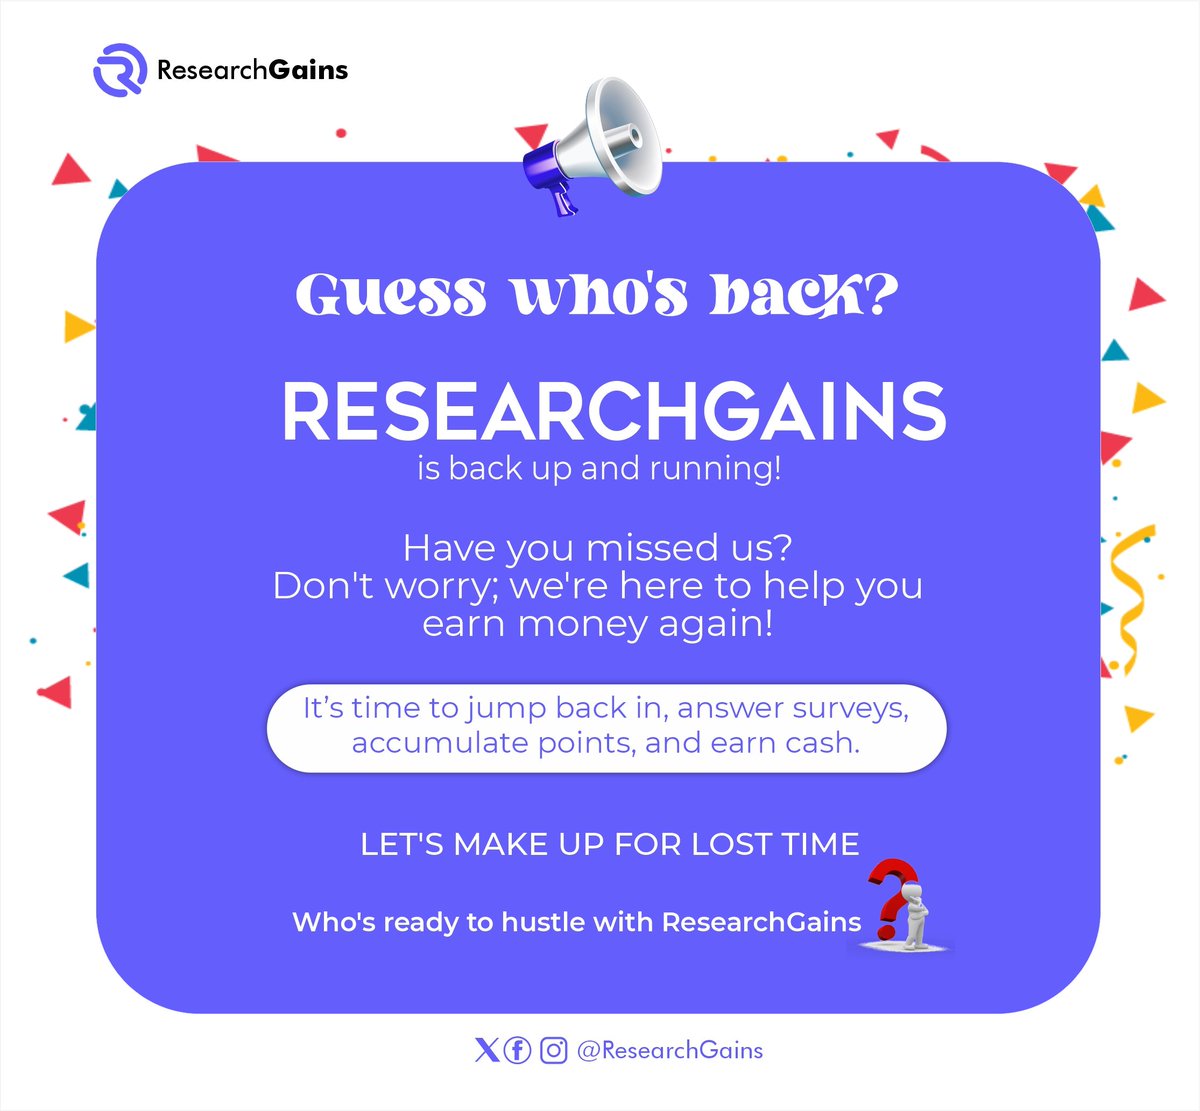 'Hi, there!🫣

It has been a while. 

ResearchGains is back and better than ever! So, get ready to earn cash by answering surveys and accumulating points.

Let's make up for lost time together! 👐

 #WeAreBack #EarnMoney #ResearchGains